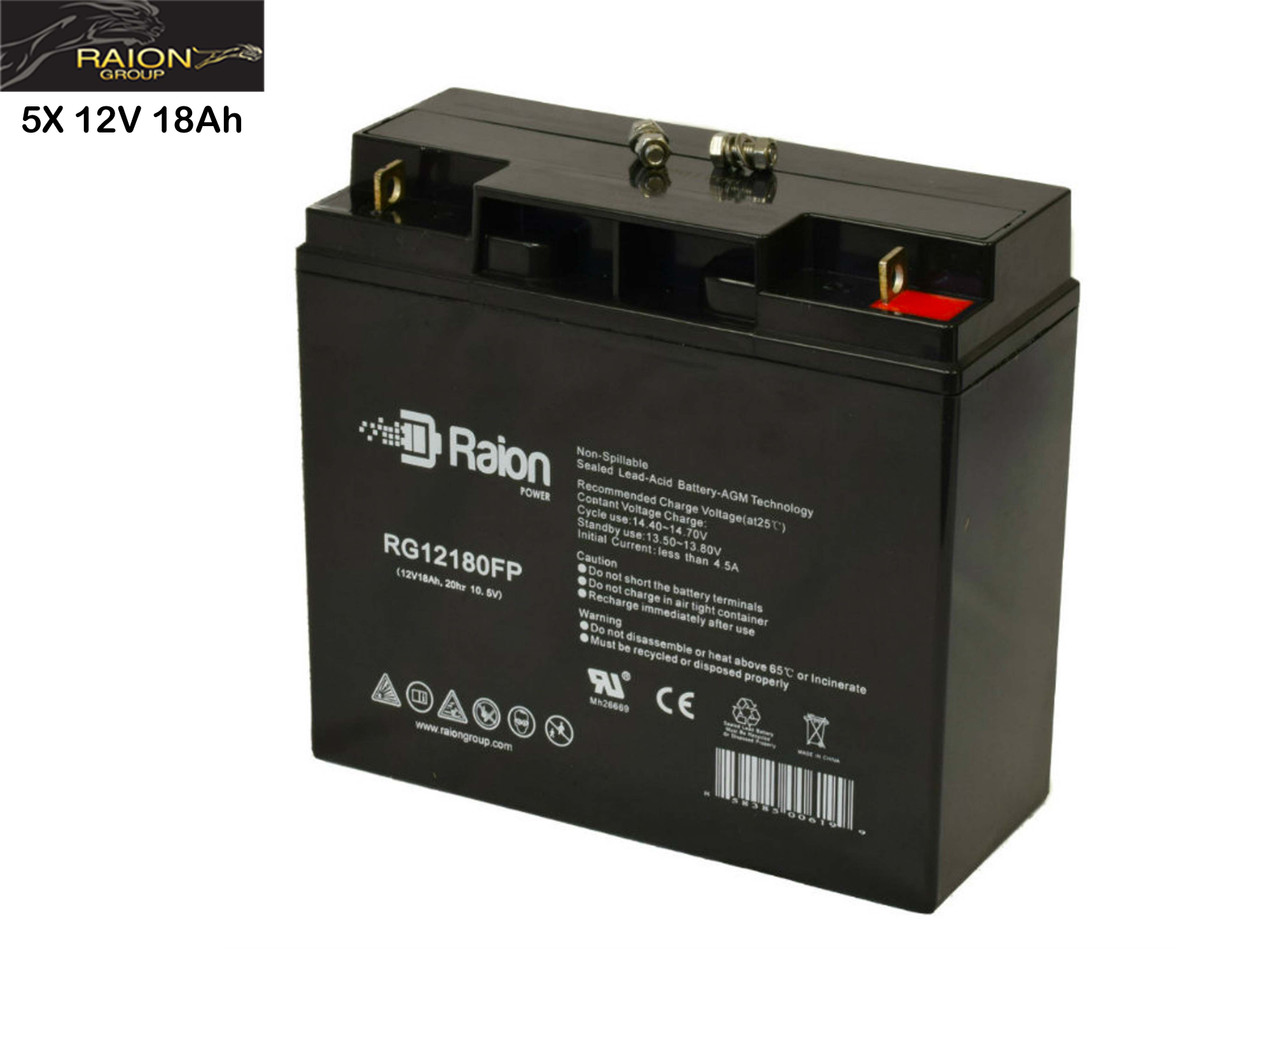 Raion Power Replacement 12V 18Ah Battery for Ecolo ET-3-Liberty - 5 Pack